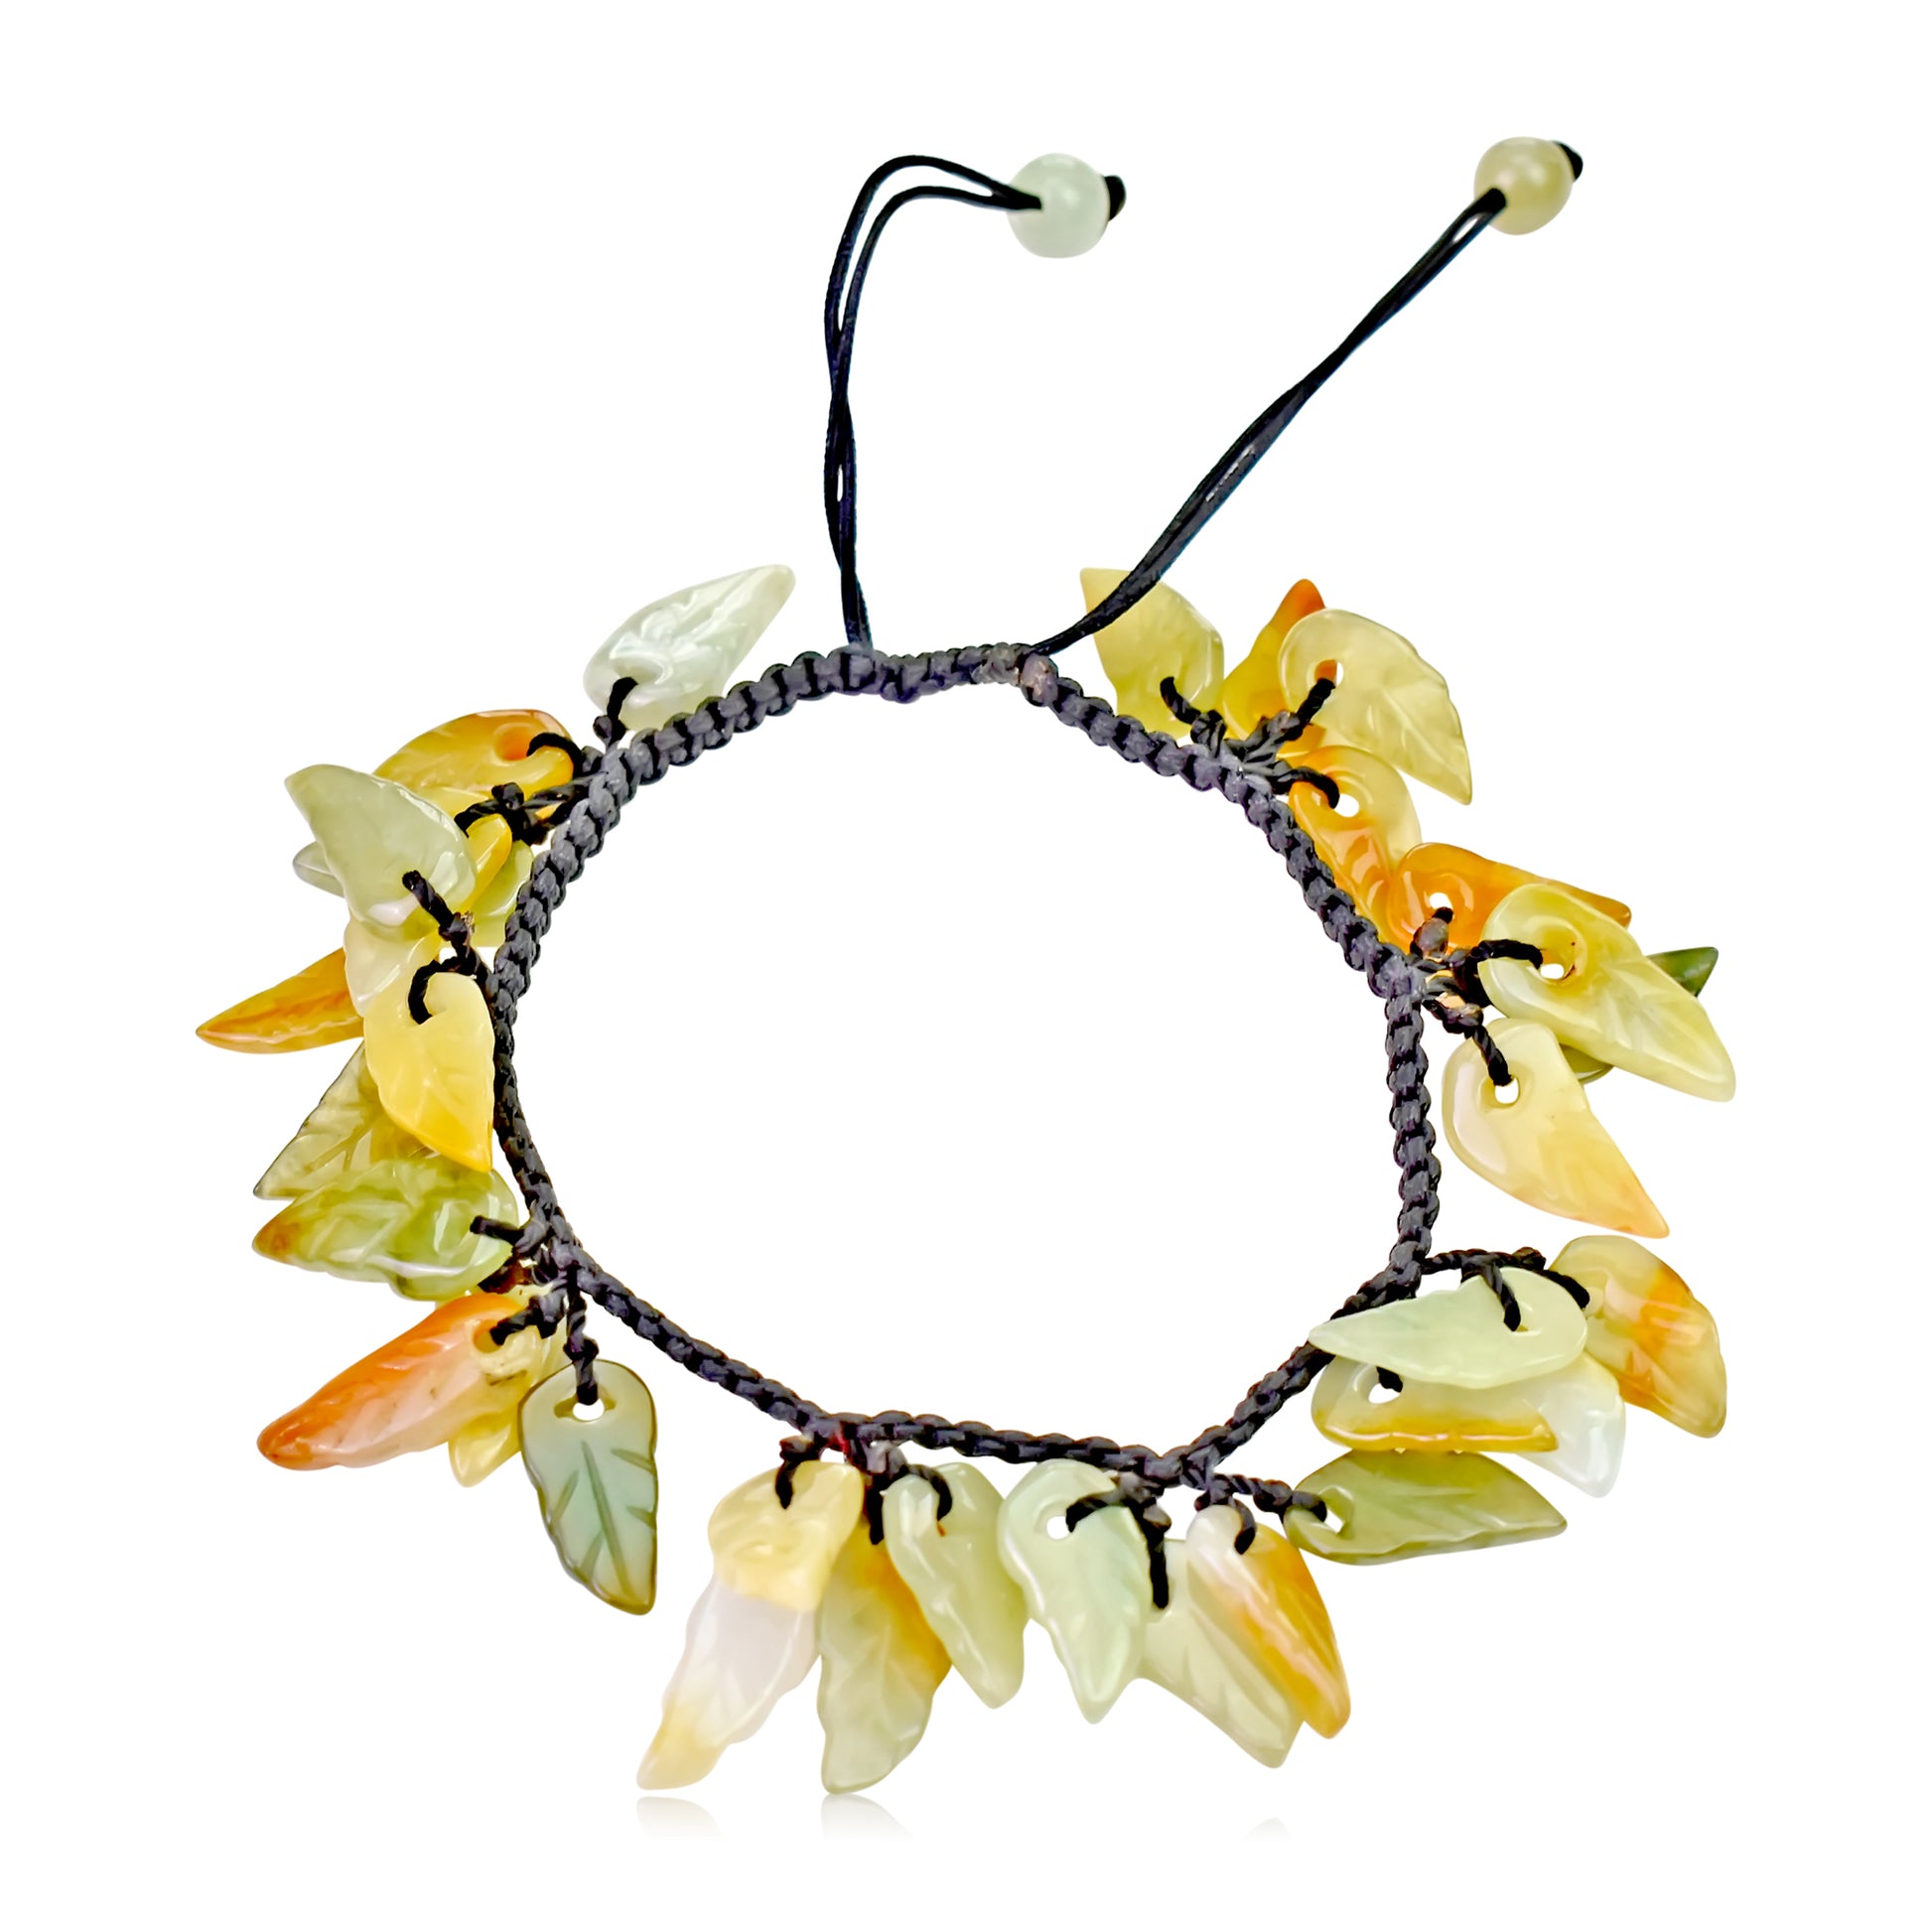 Express Your Style with Handcrafted Leafs Jewellery from Mother Earth made with Black Cord